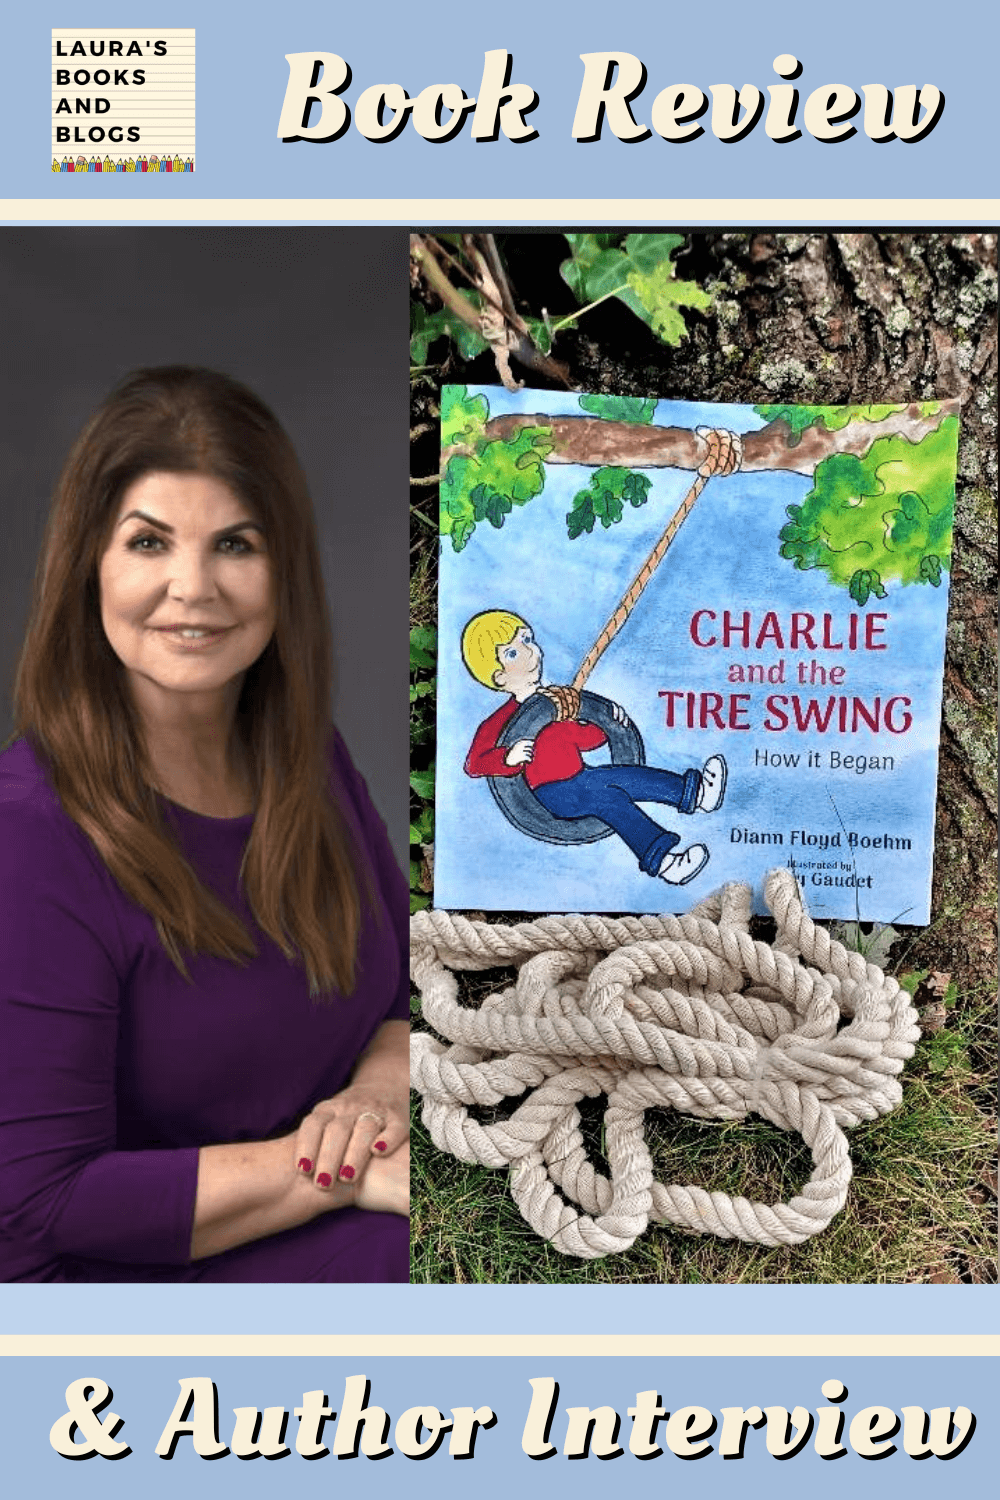 Charlie and the Tire Swing pin